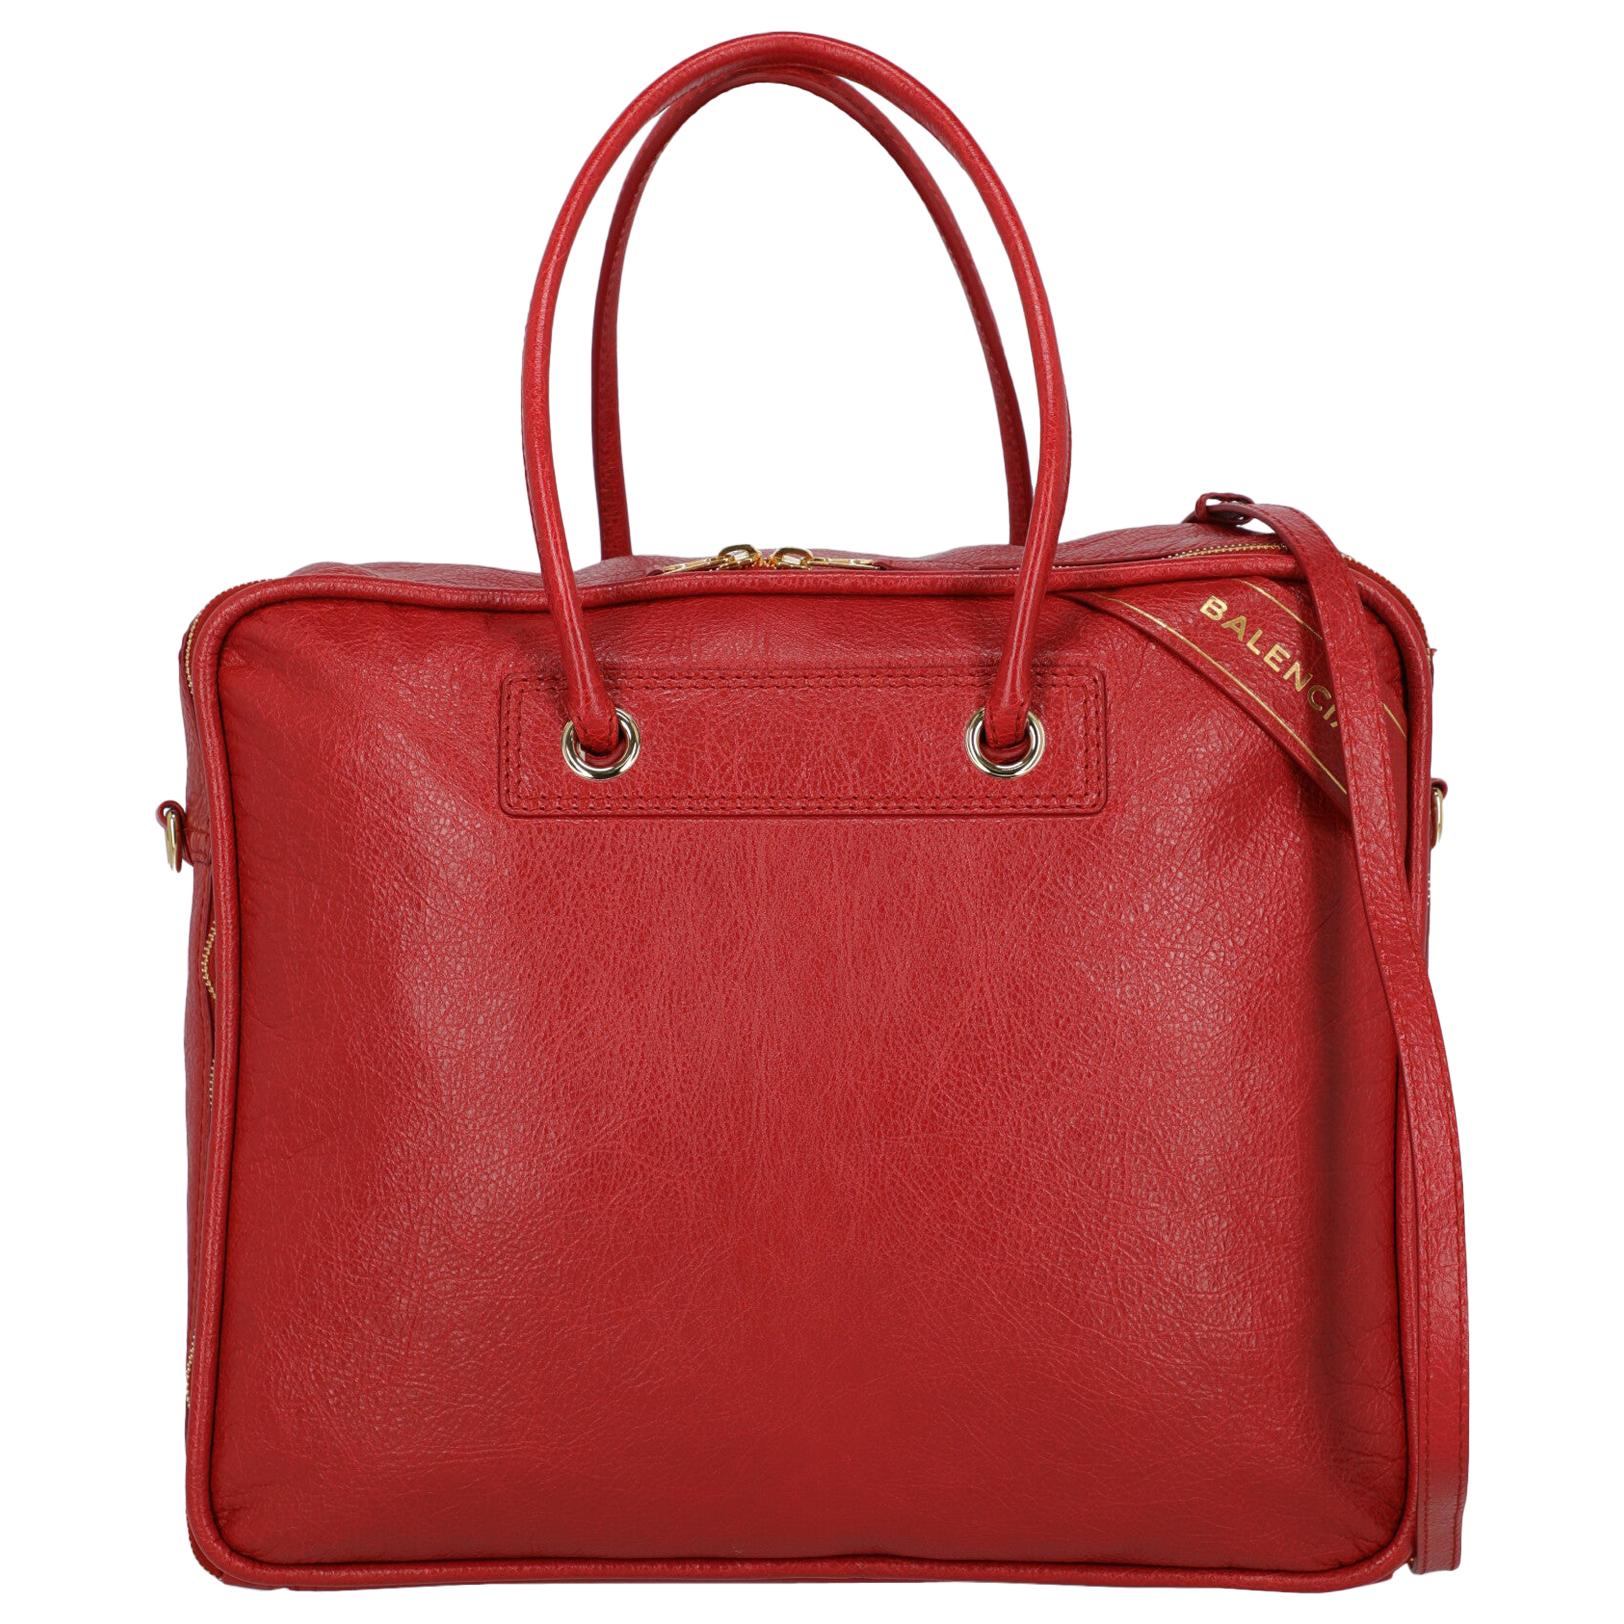 Balenciaga Woman Shoulder bag Red Leather For Sale